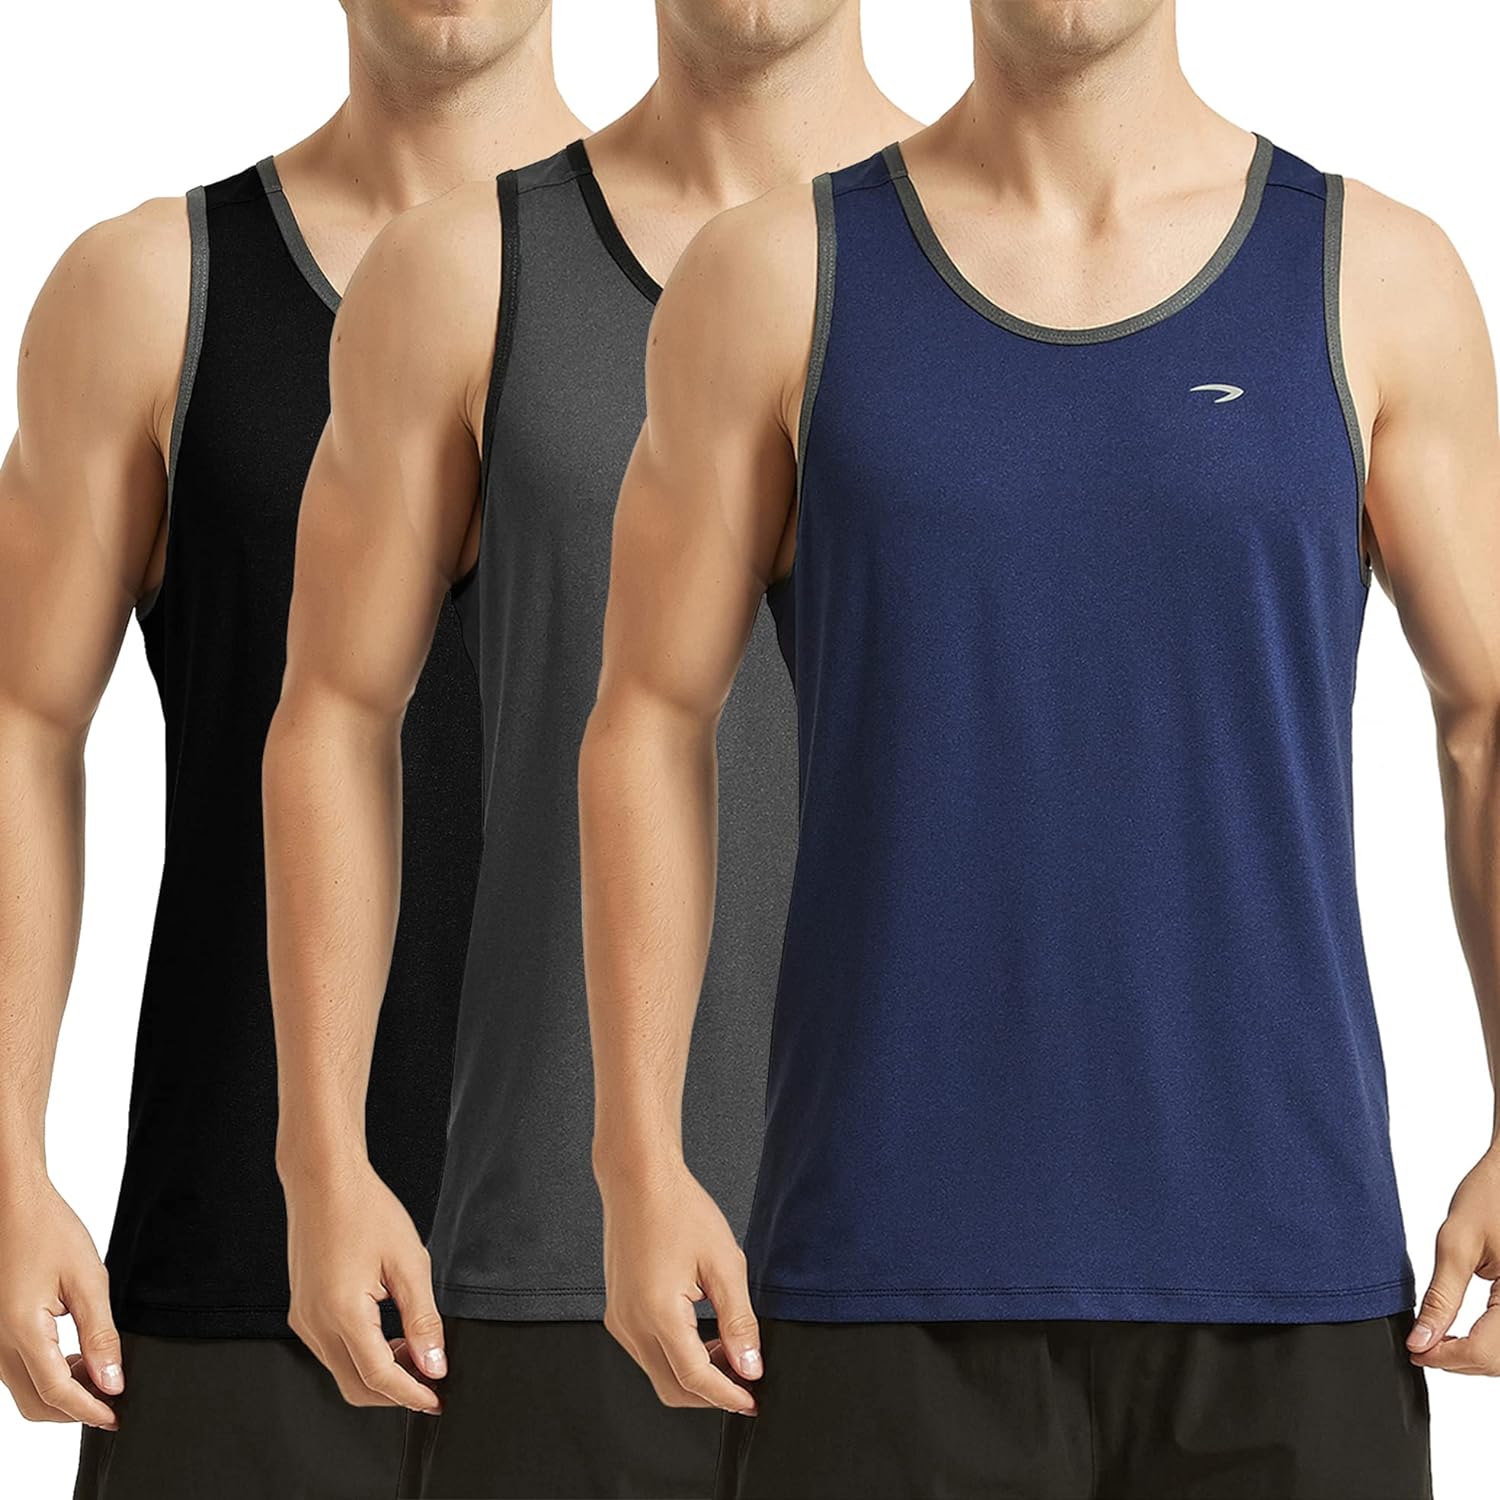 KPSUN Mens Quick Dry Sports Tank Tops Athletic Gym Bodybuilding Fitness Sleeveless Shirts for Beach Running Workout